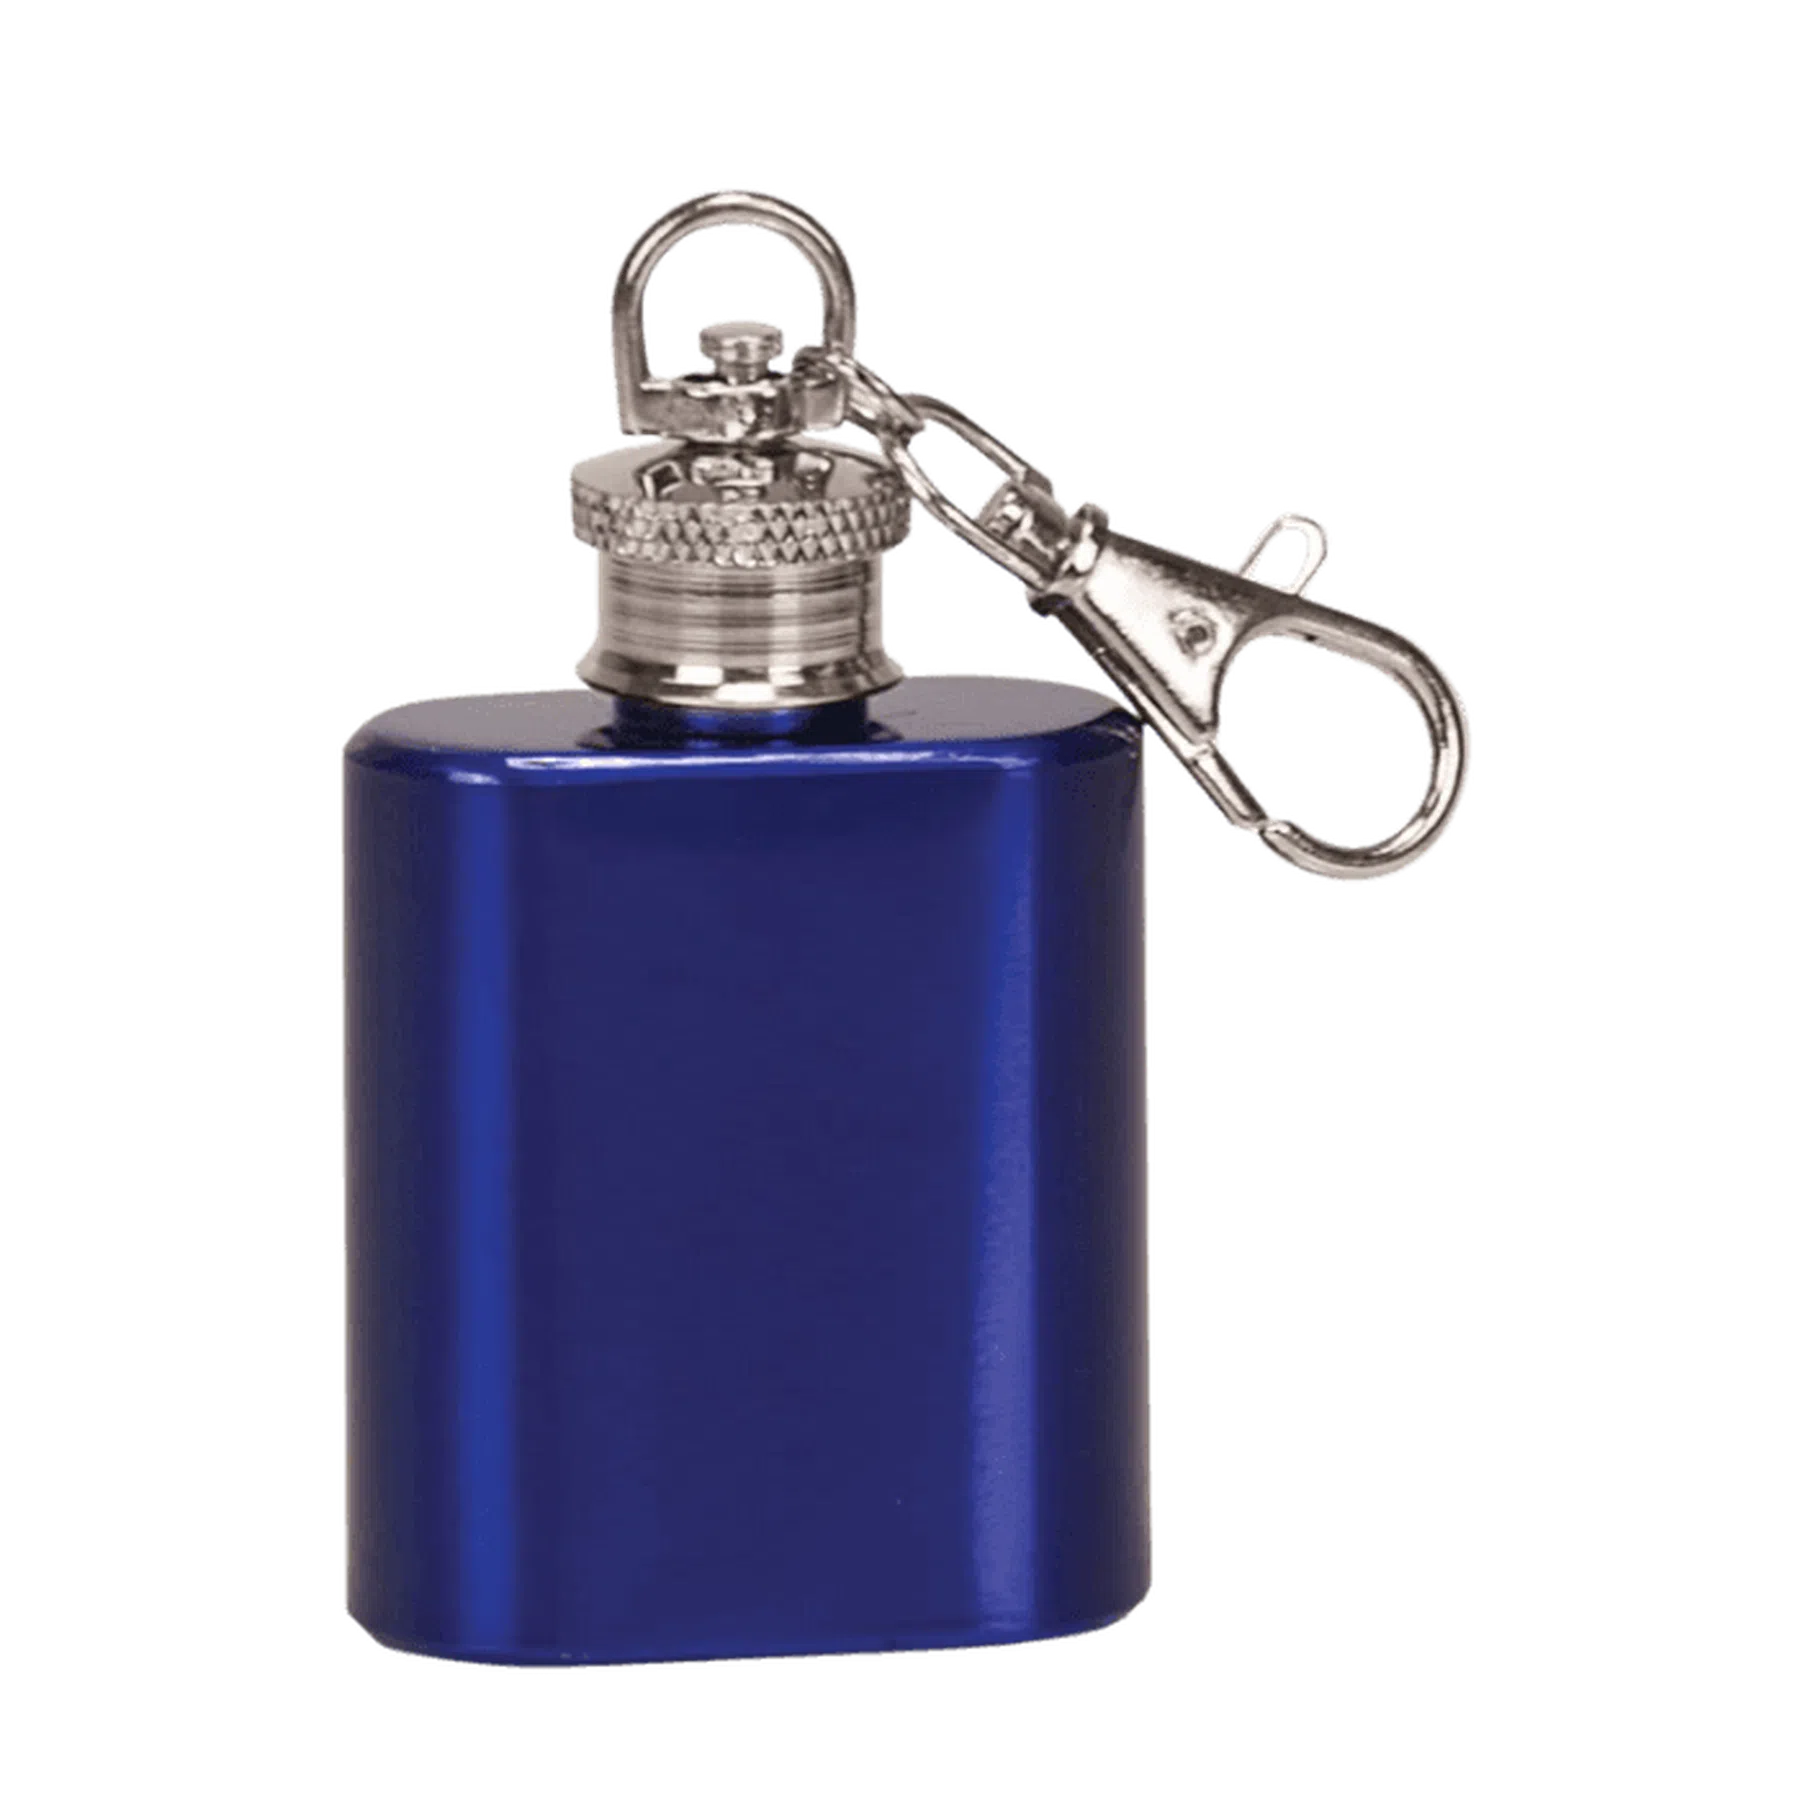 Flask Keychain 1 oz. (Various Colors)